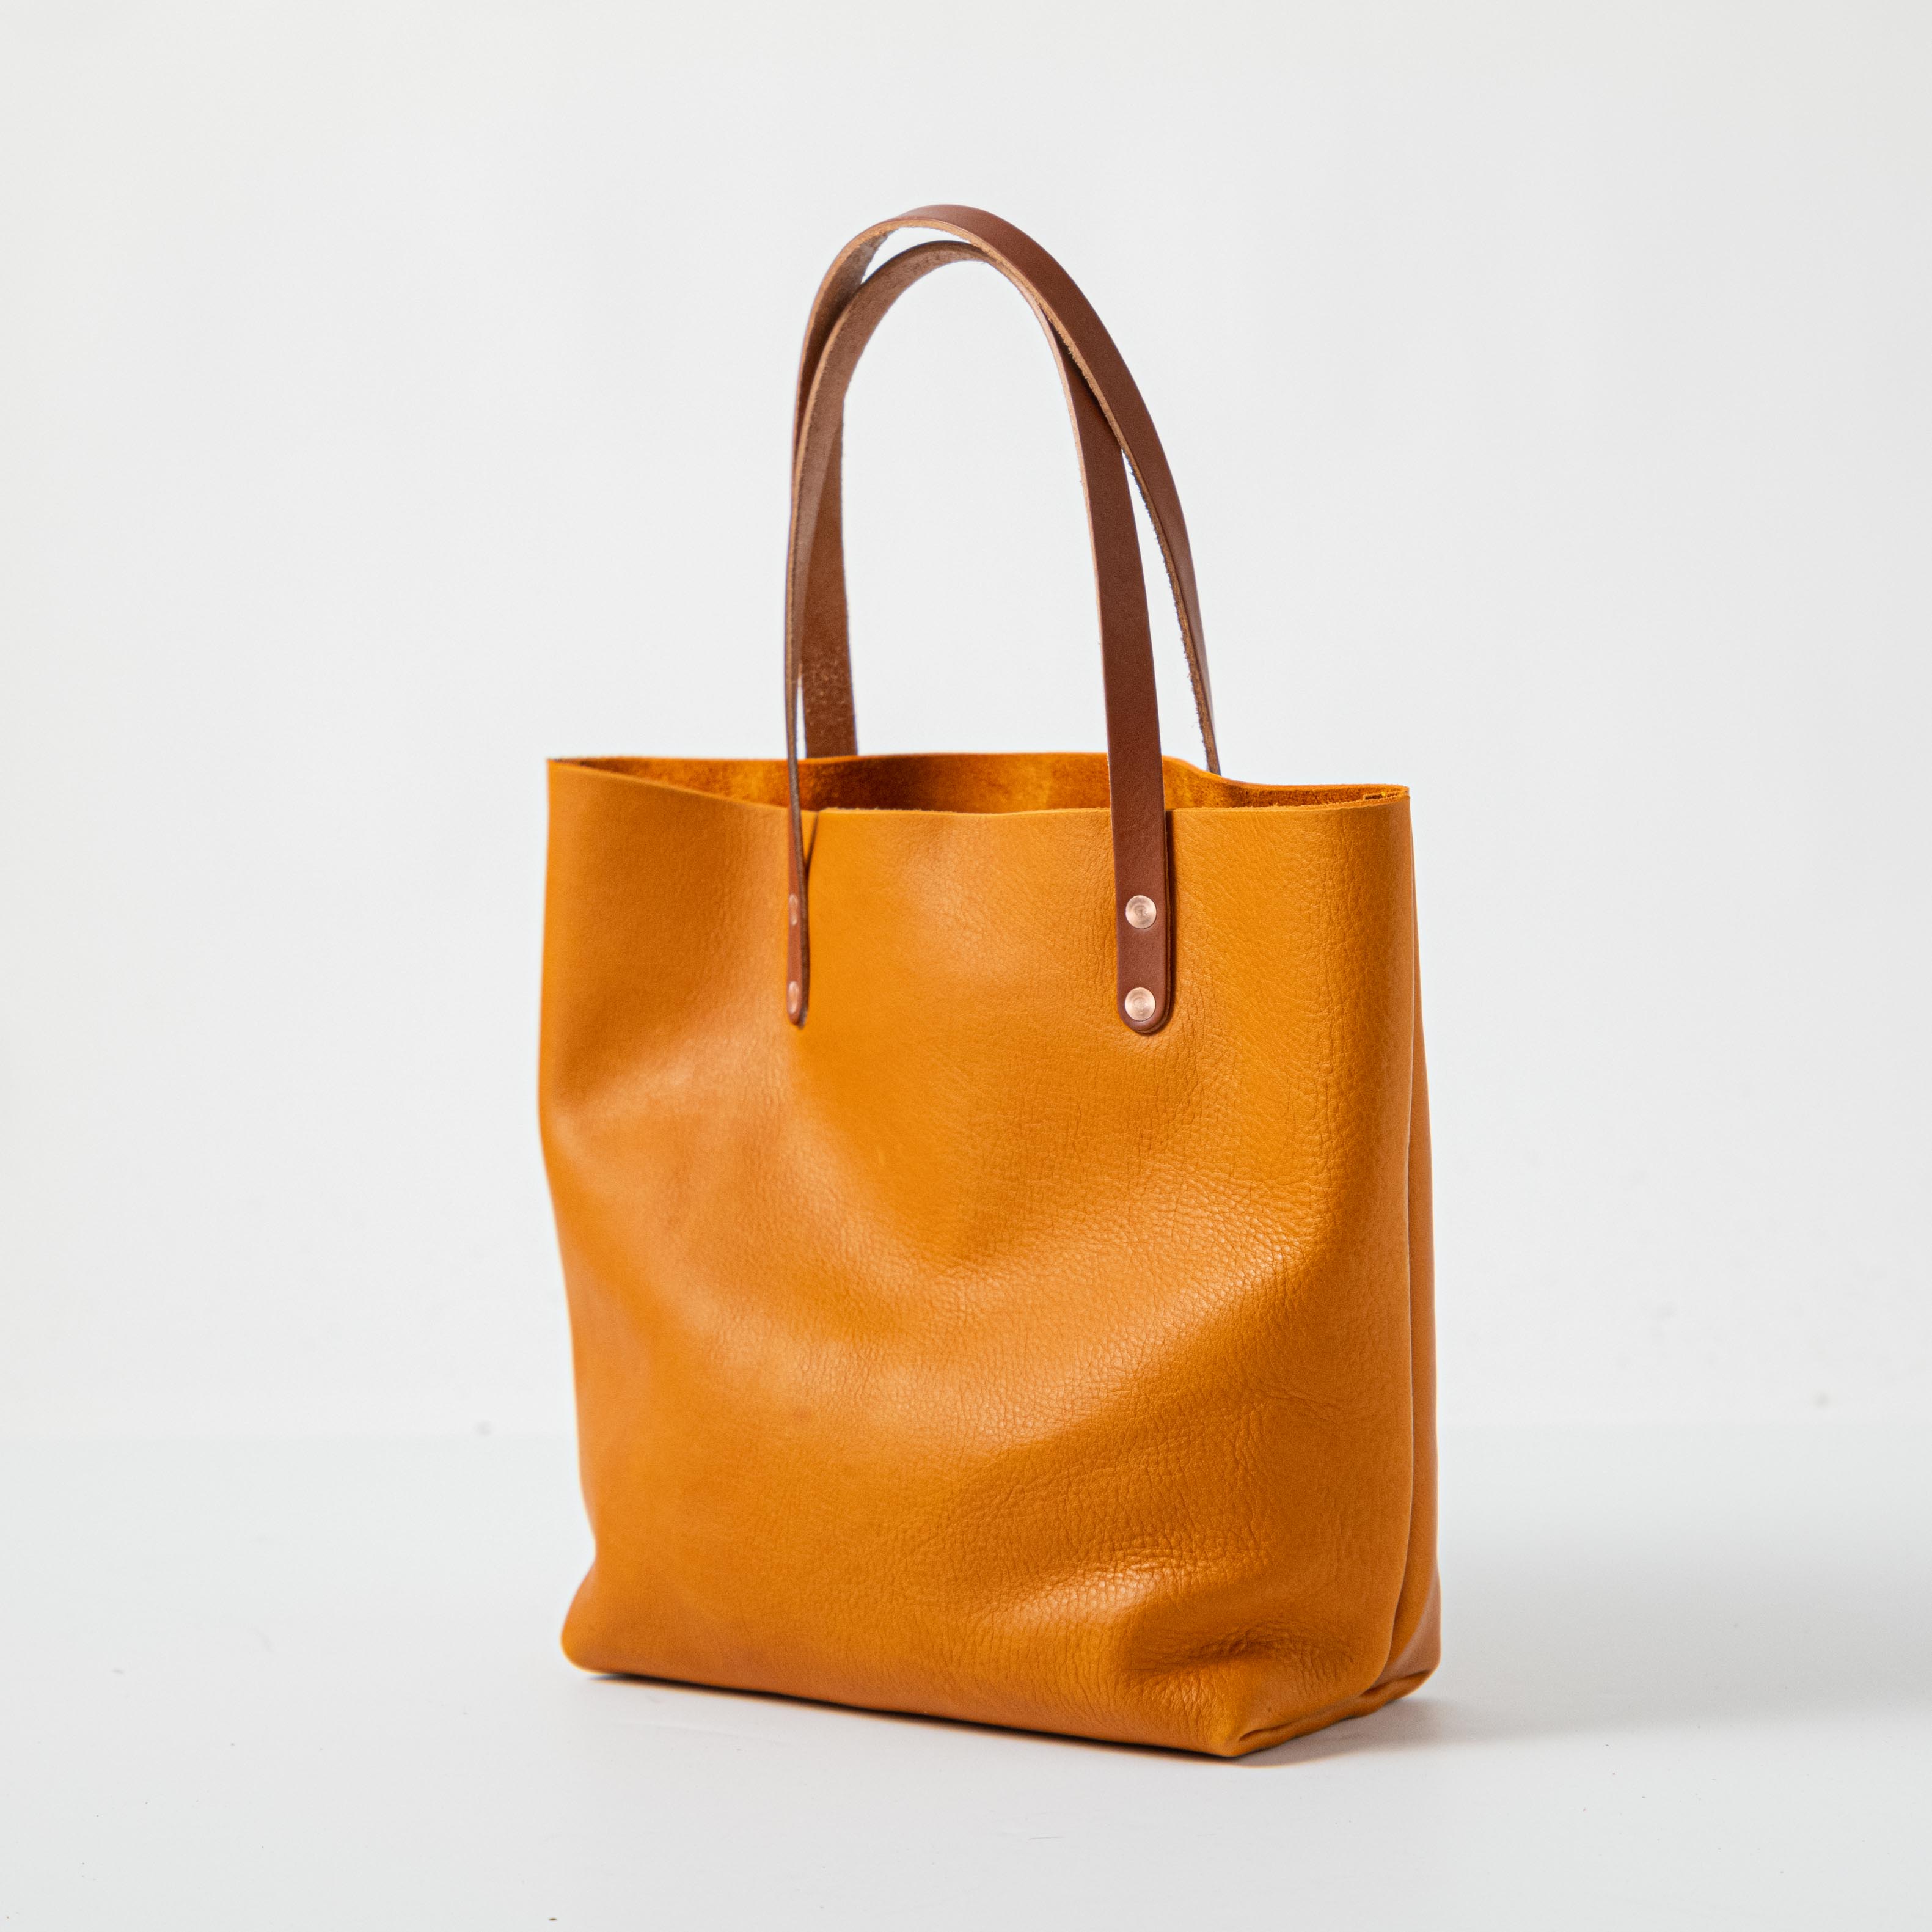 Leather Tote Bags: Rose Cypress Tote | Leather Bags by KMM & Co. 11-inch +$25 / Snap Closure (FINAL Sale) +$10